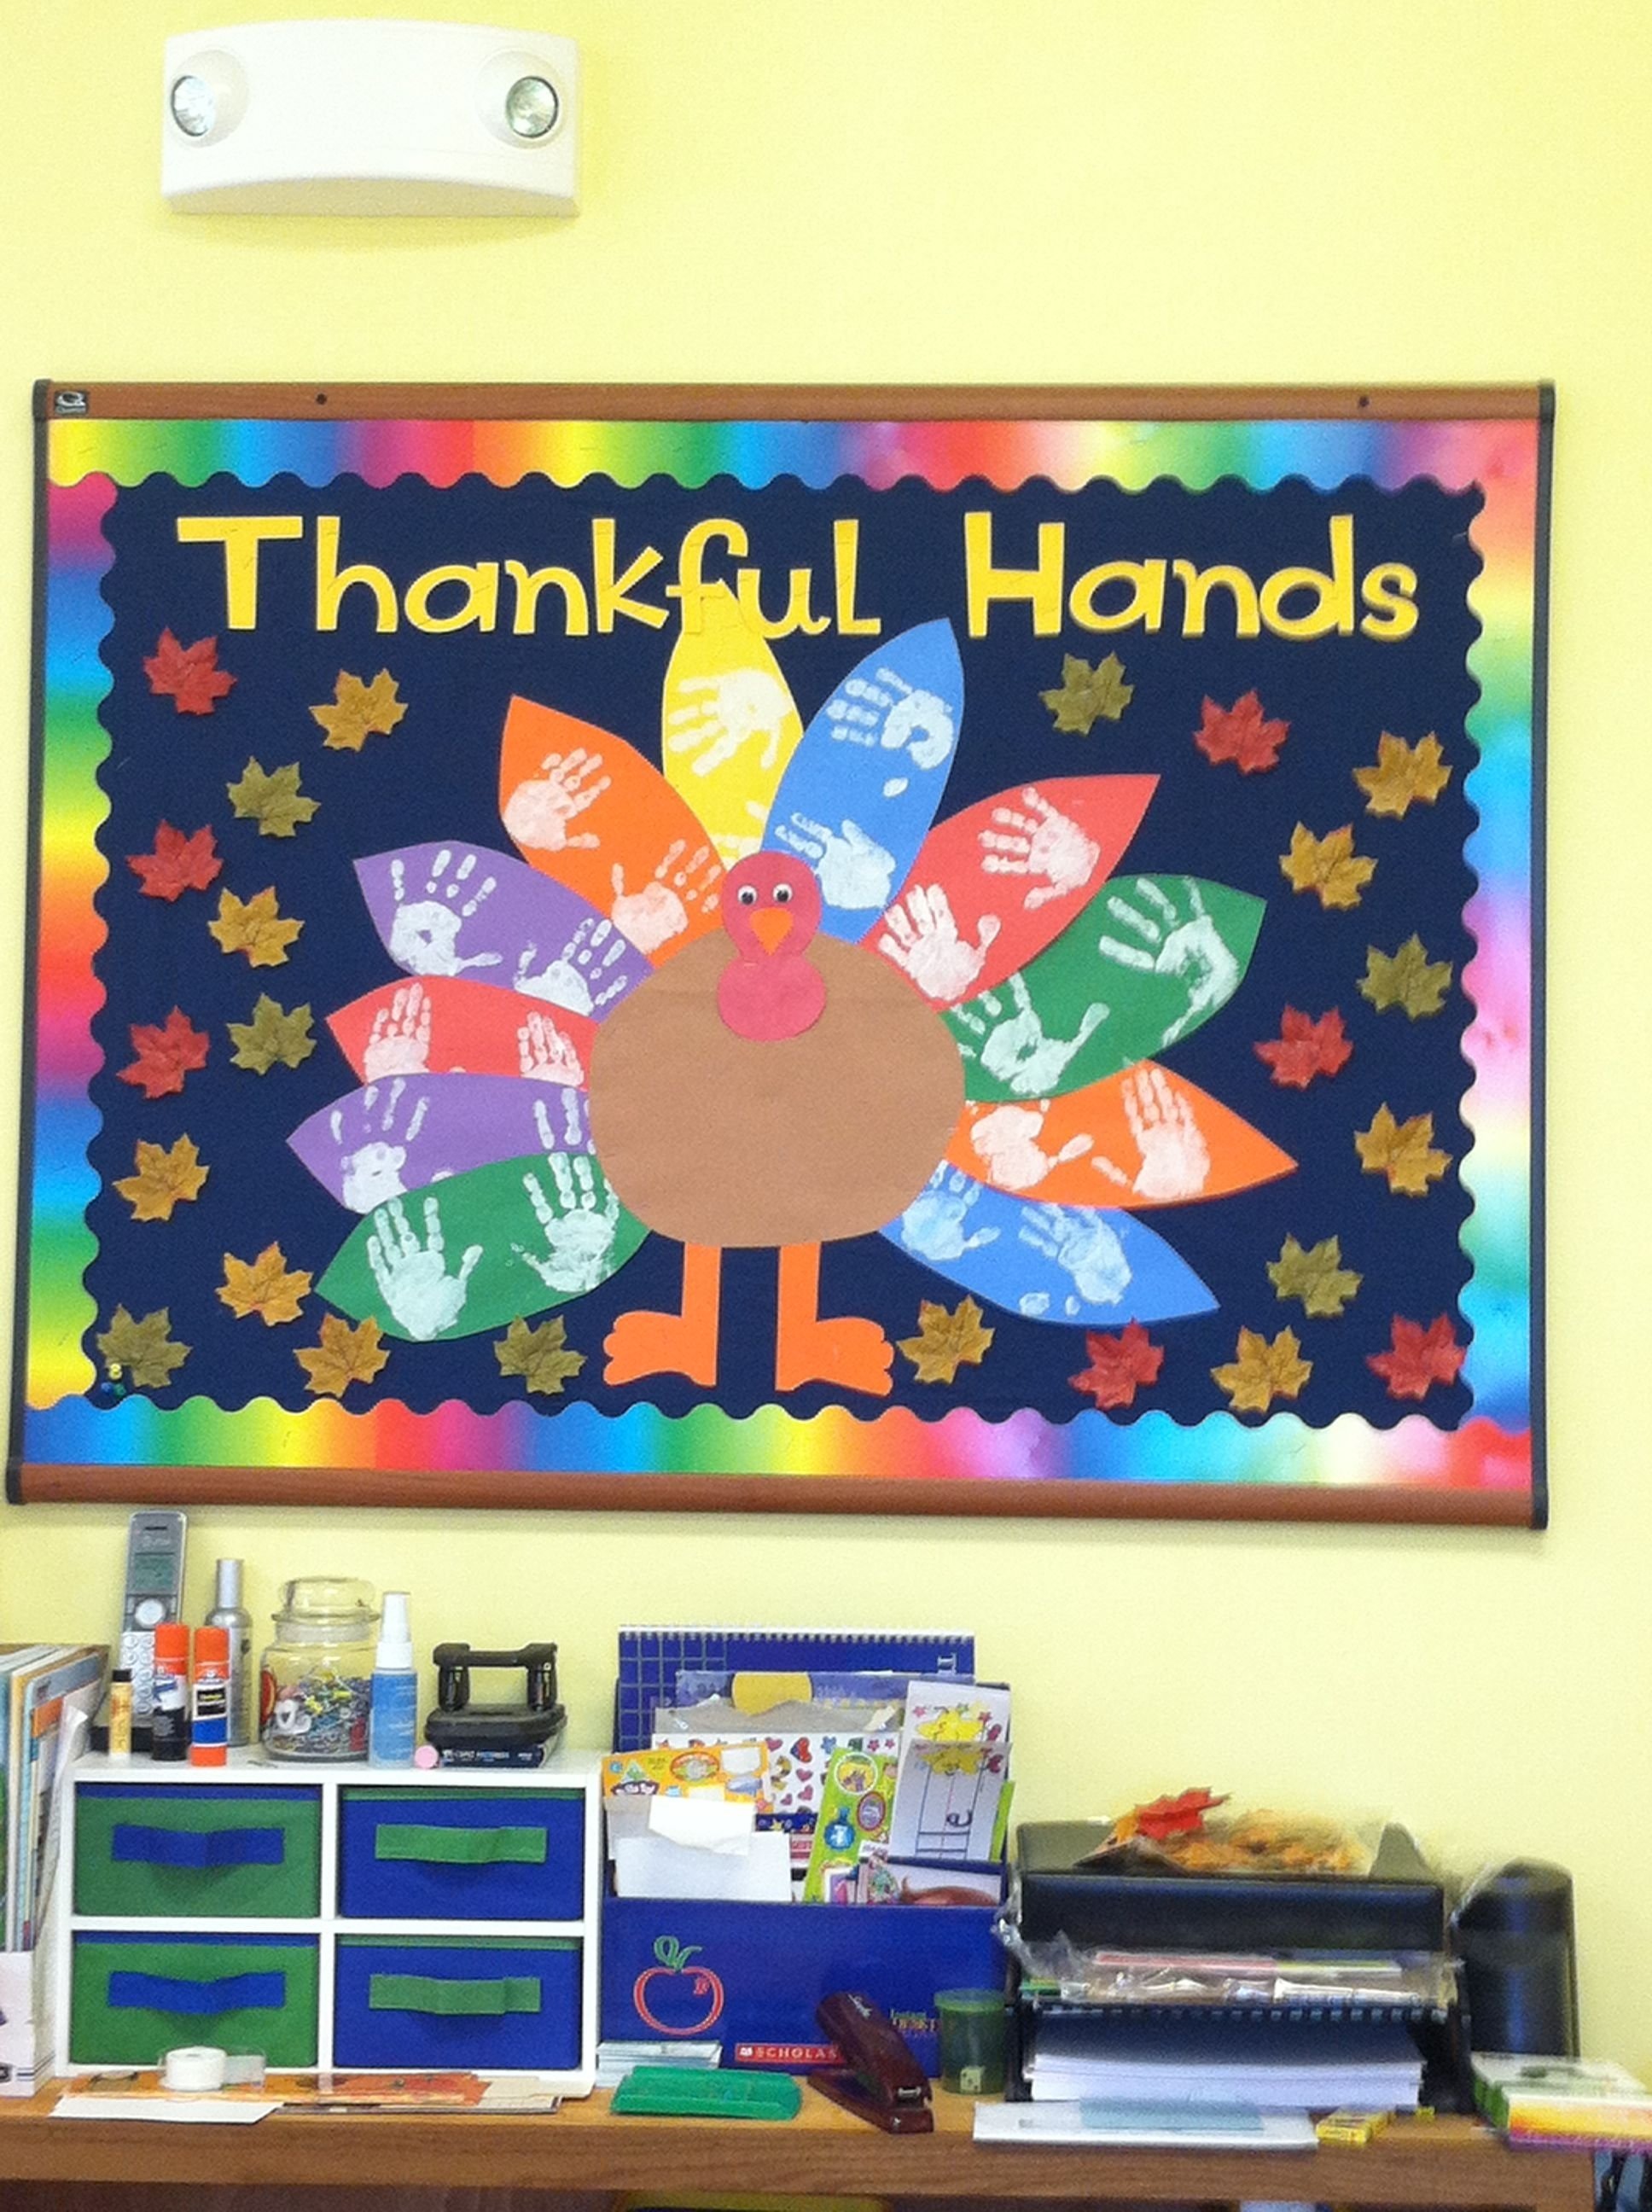 10 Perfect Preschool Thanksgiving Bulletin Board Ideas thanksgiving bulletin board cms thankful notes on tail feathers 1 2023